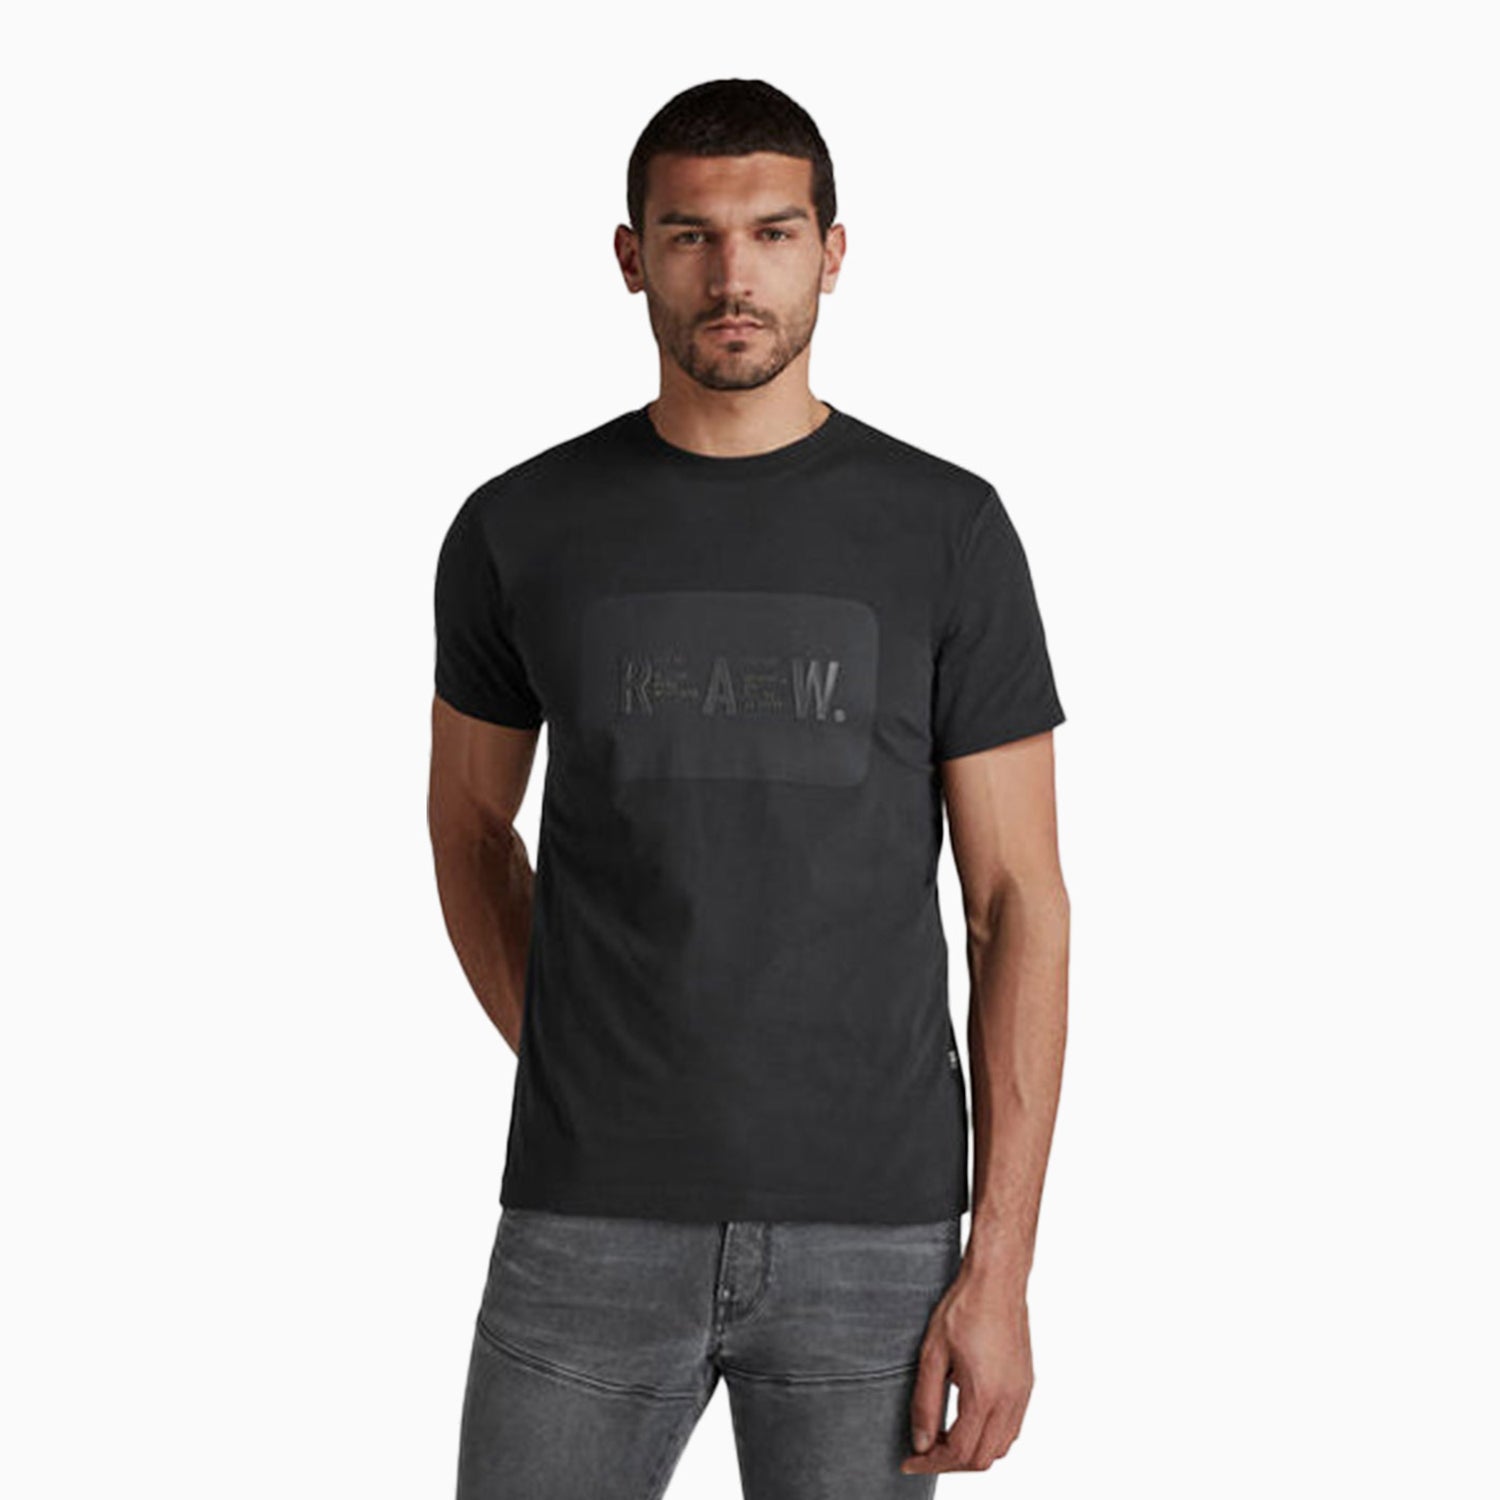 g-star-raw-mens-raw-double-layer-t-shirt-d20722-336-6484